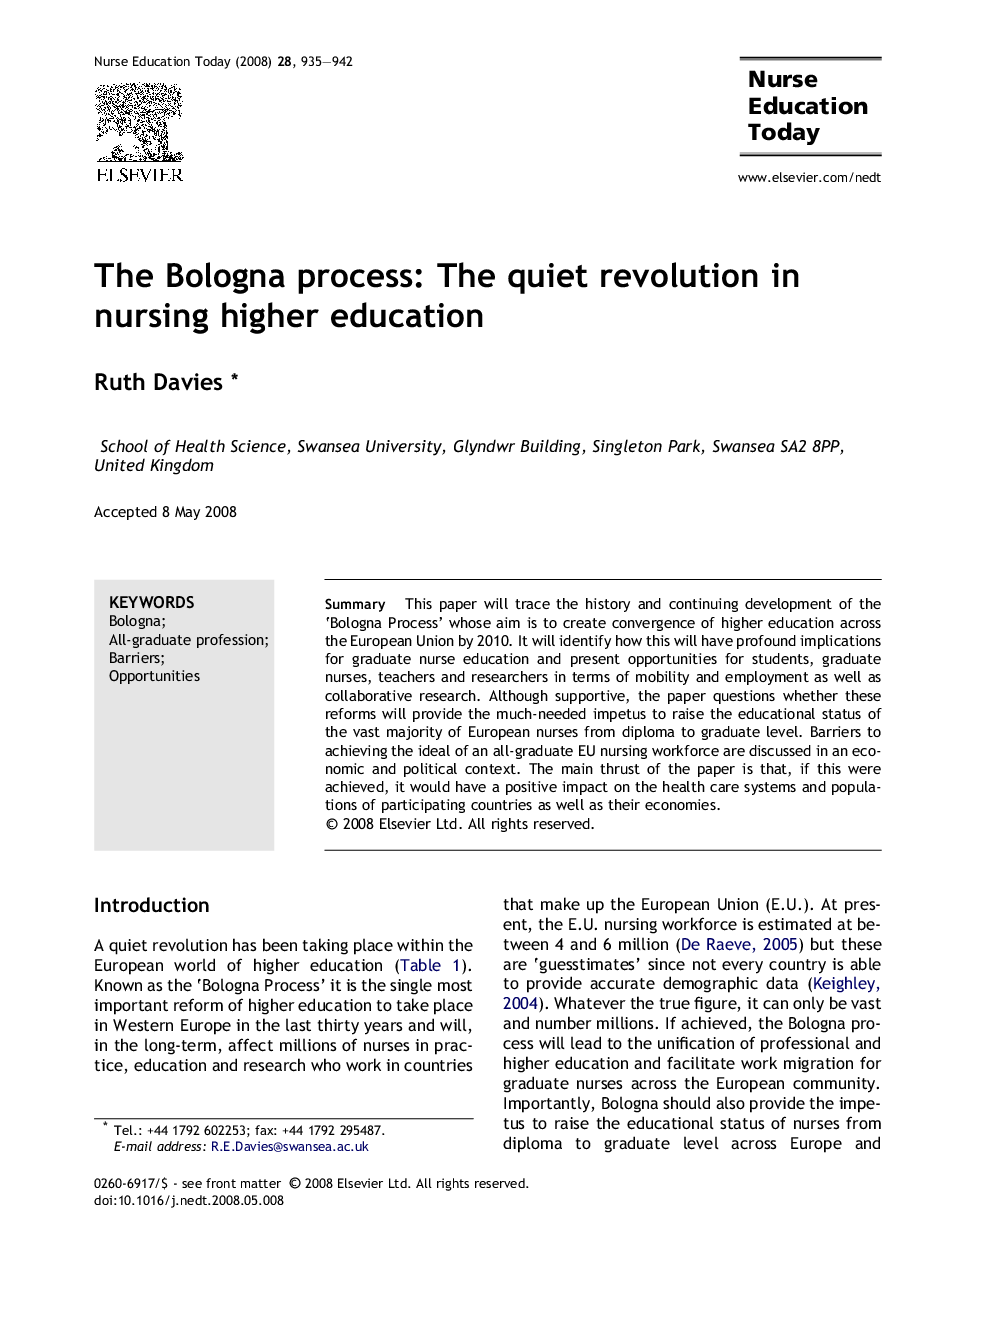 The Bologna process: The quiet revolution in nursing higher education